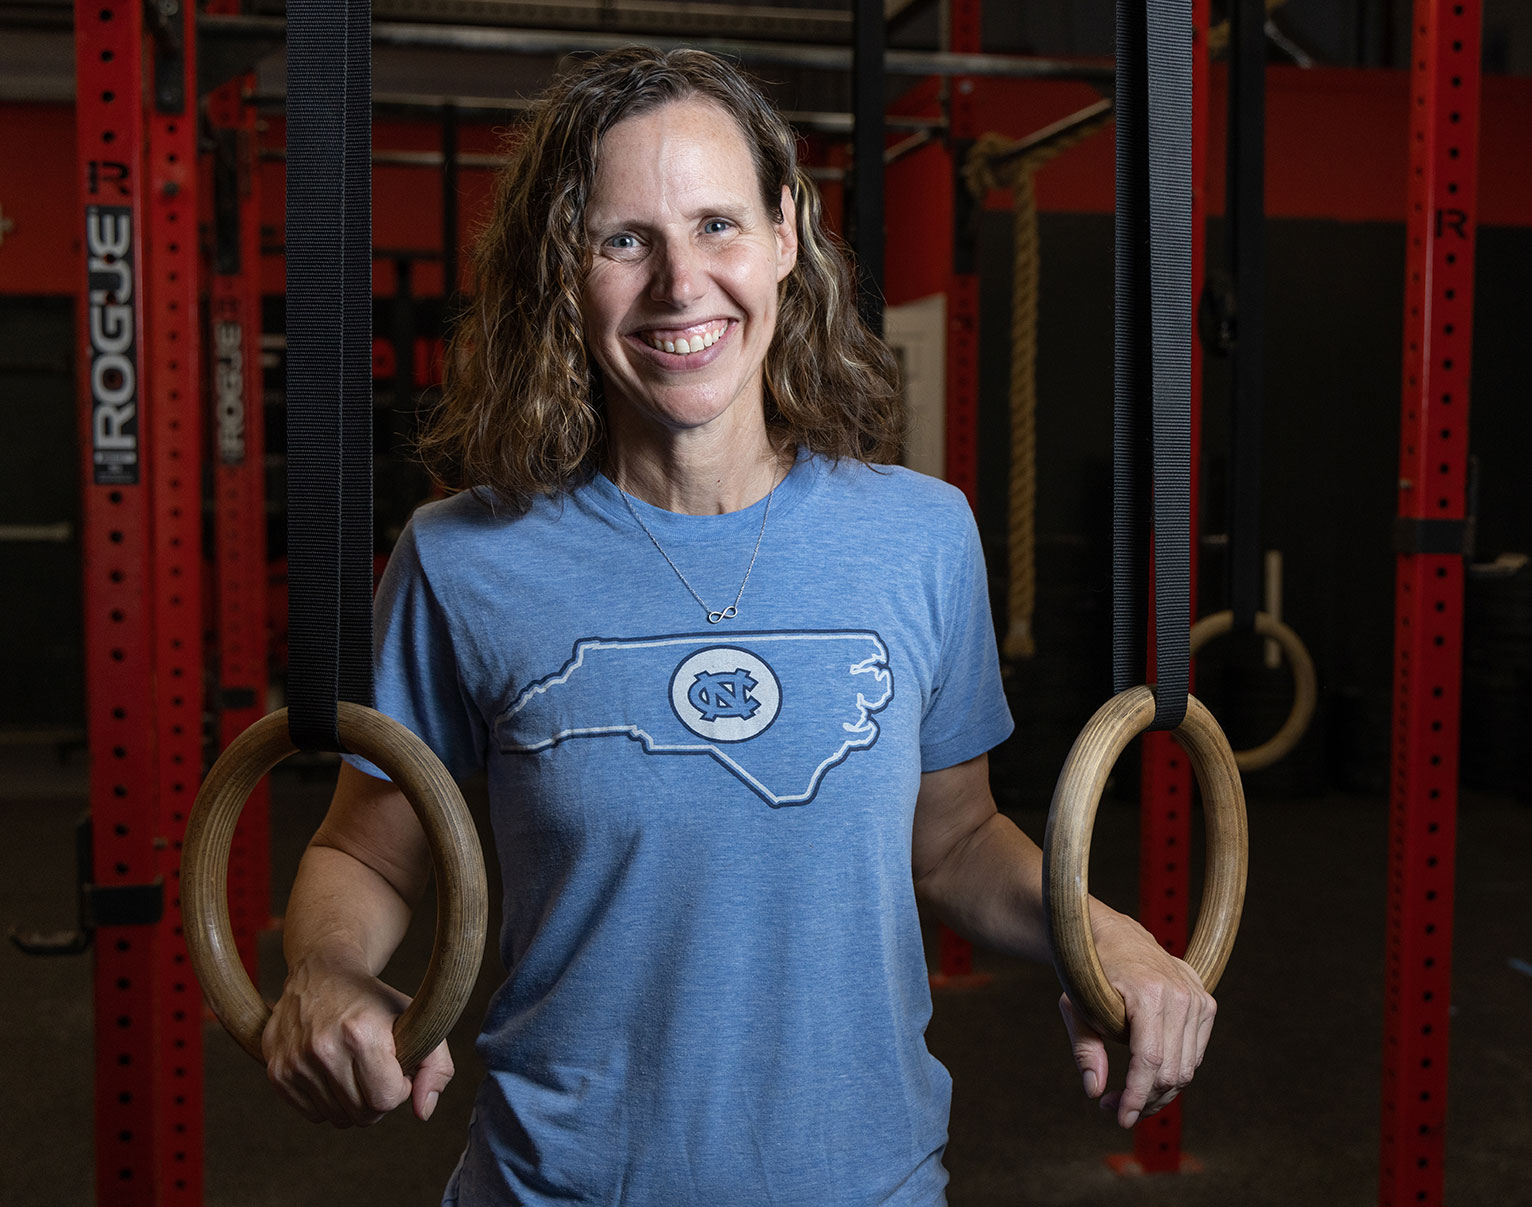 Kara Hume poses with her hands in rings at a gym